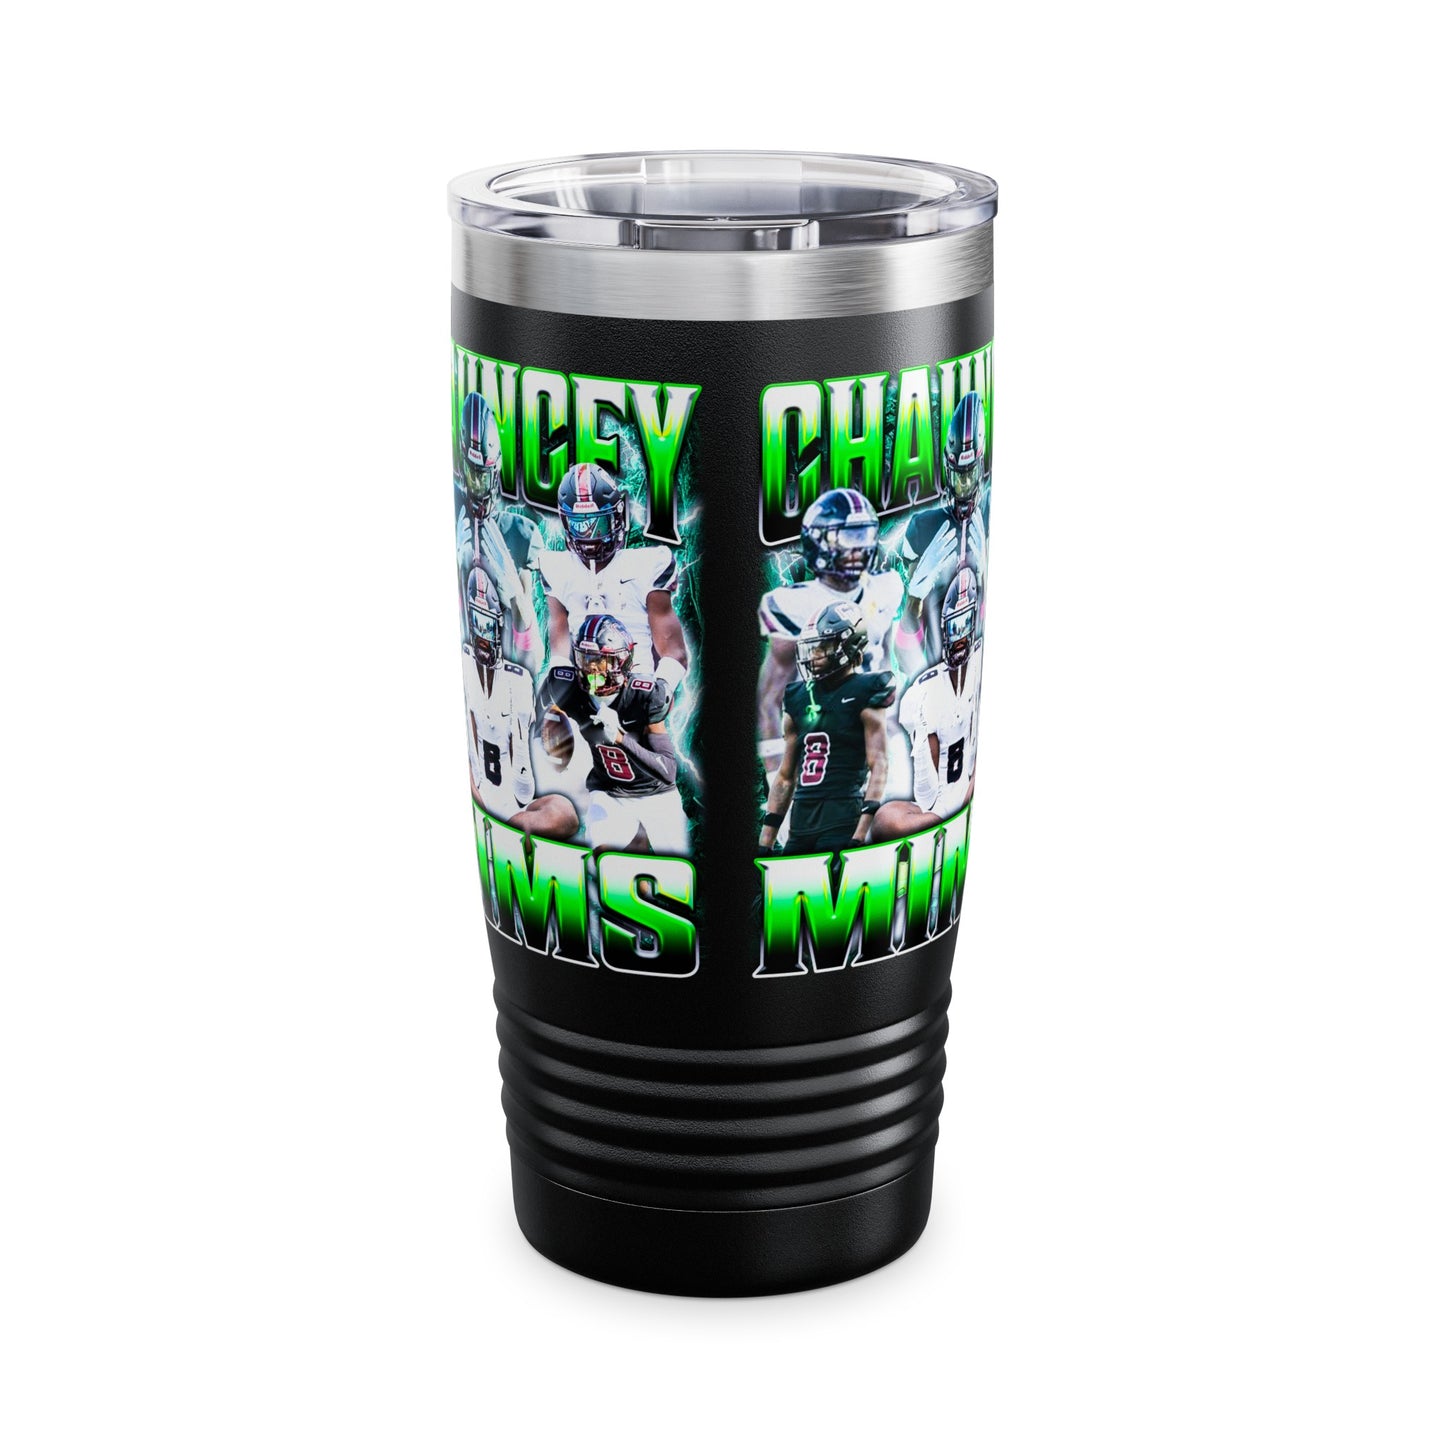 Chauncey Mims Stainless Steal Tumbler